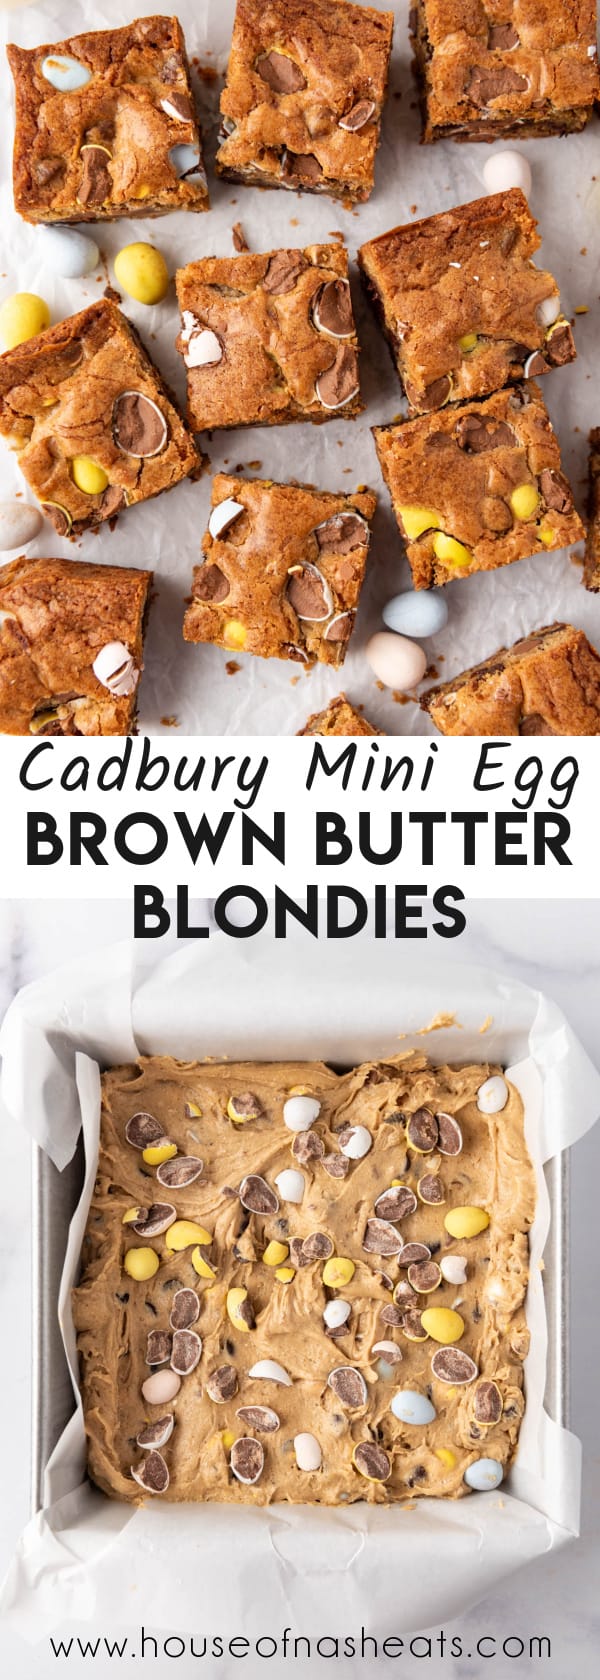 A collage of images of brown butter blondies with cadbury mini eggs with text overlay.